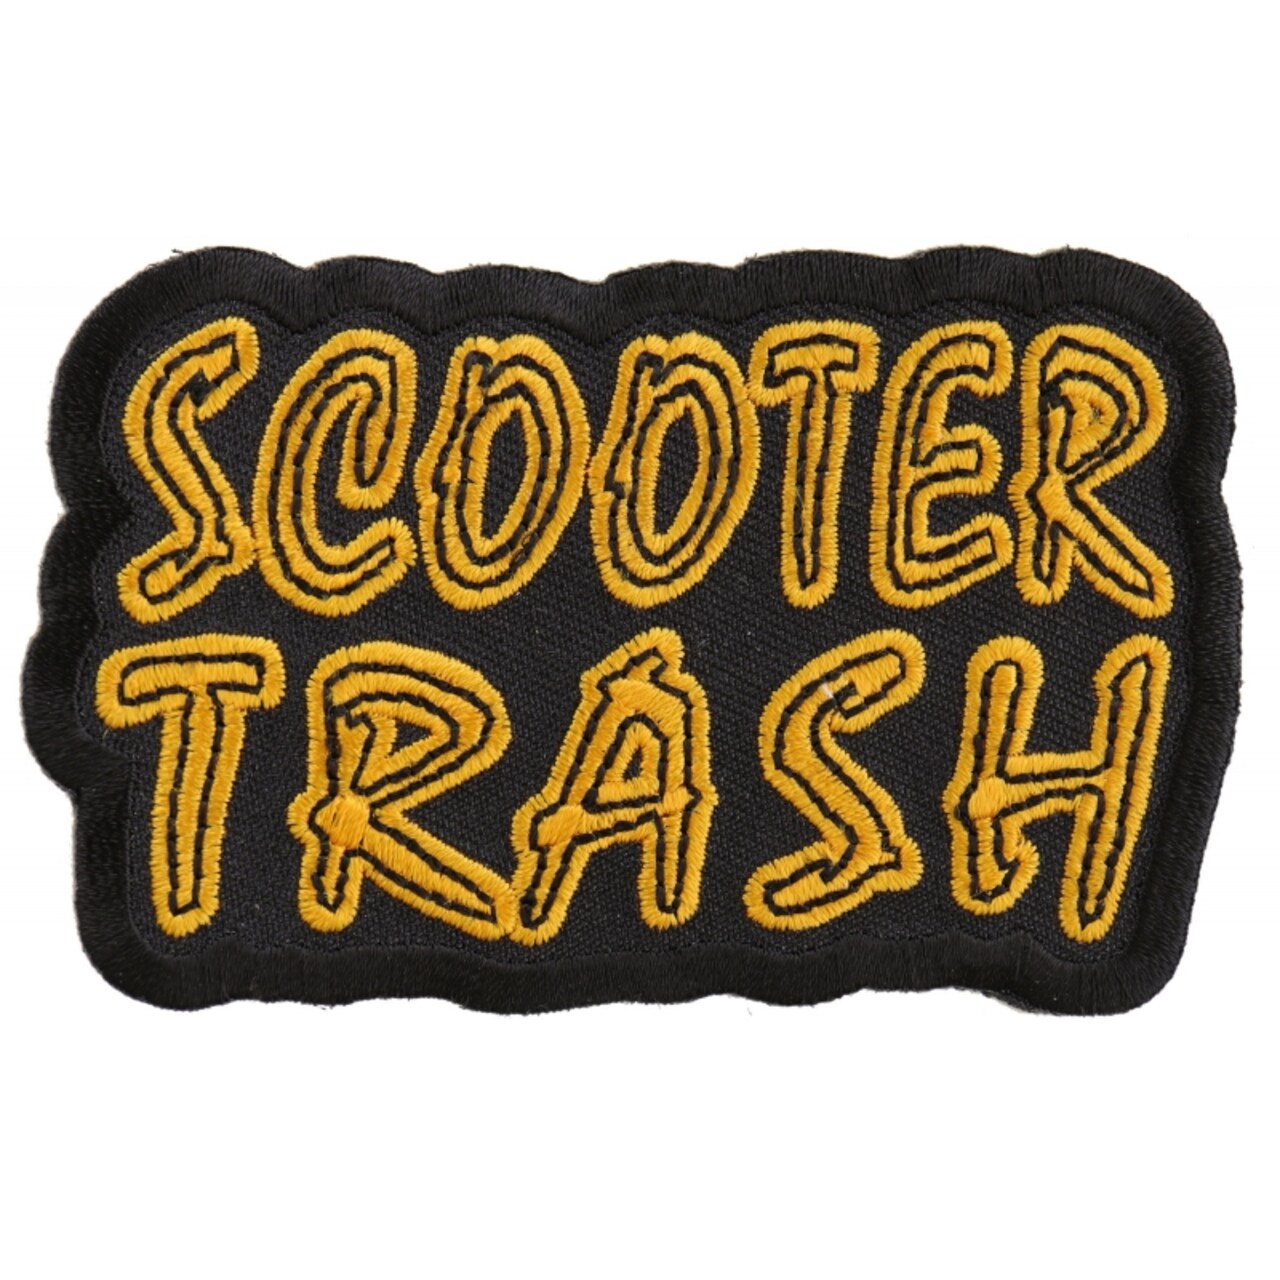 Patch, Embroidered Patch (Iron-On or Sew-On), Scooter Trash Funny Patch,  3.5 x 2.5